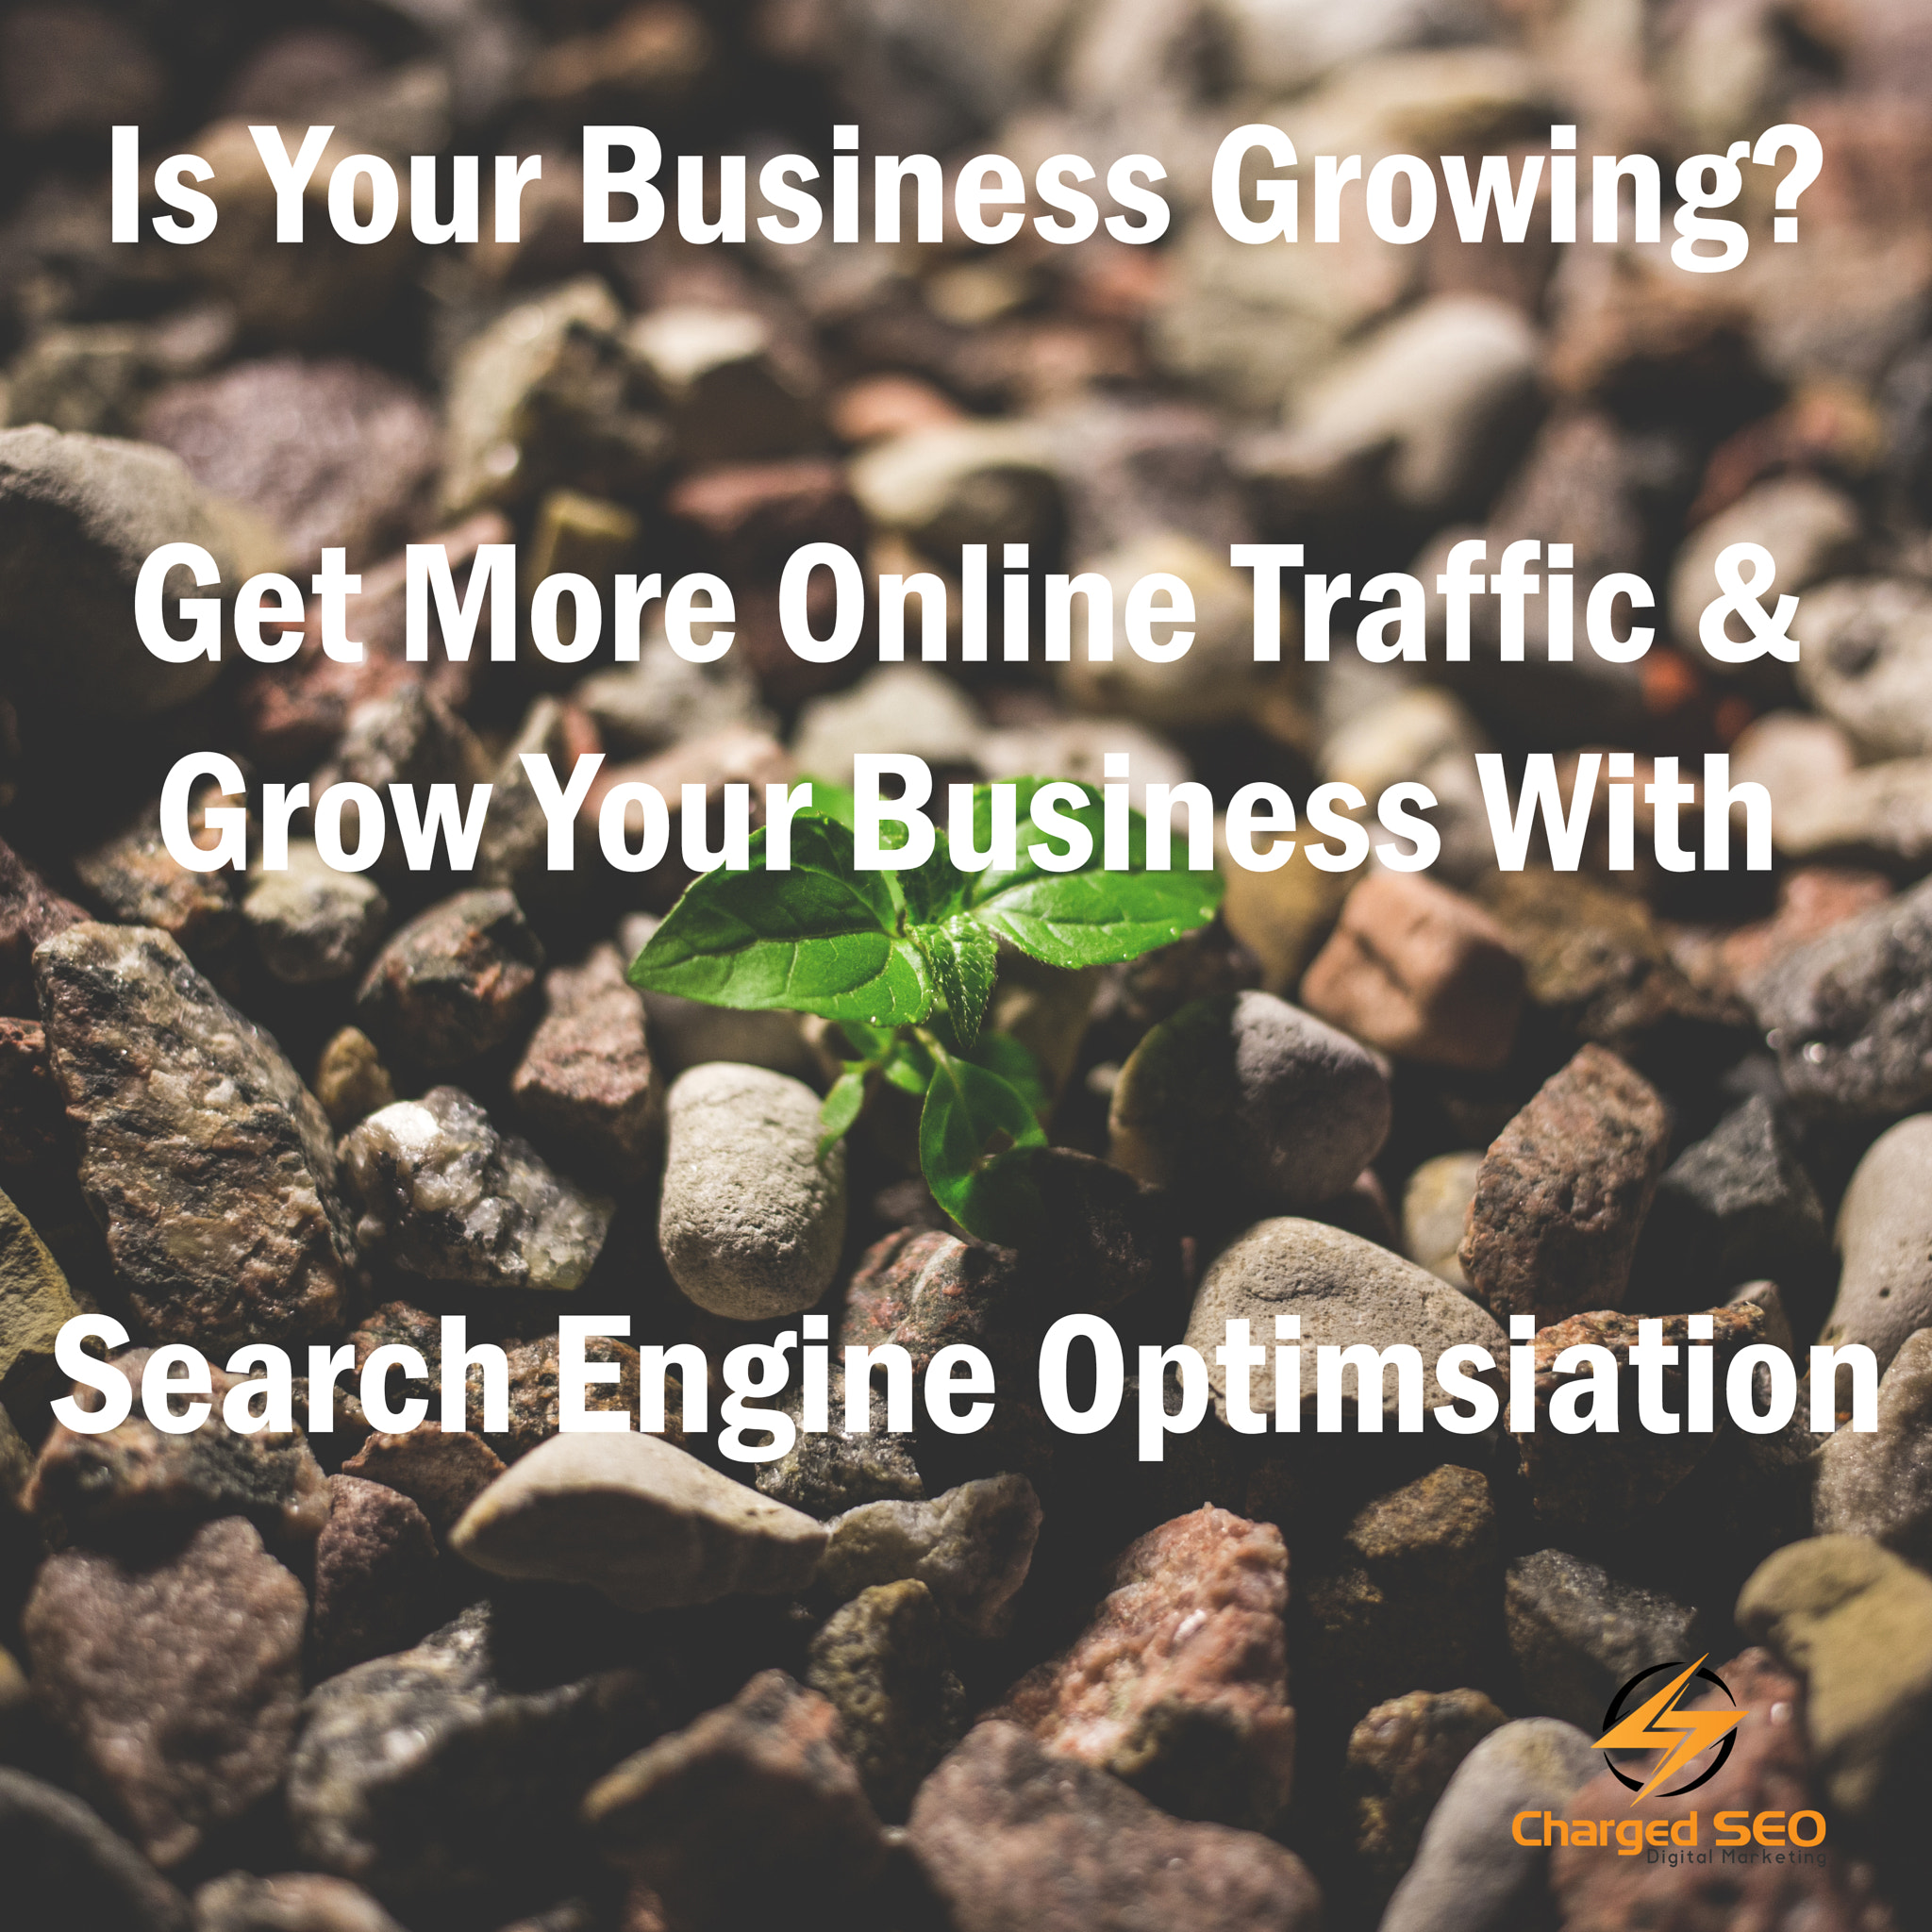 SEO Marketing for business growth